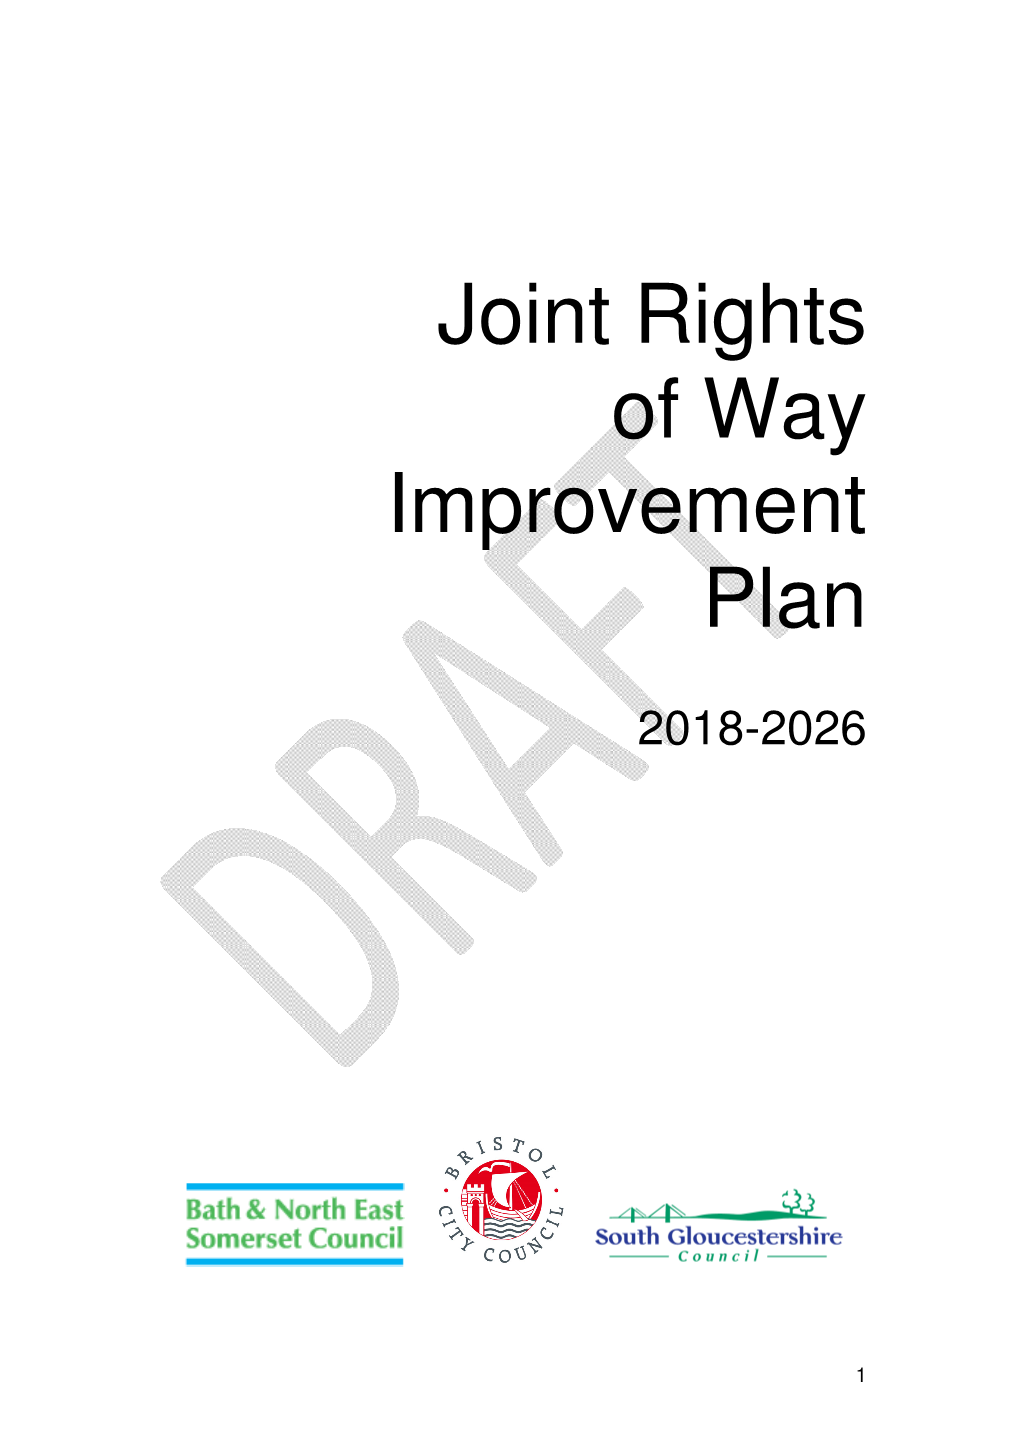 Joint Rights of Way Improvement Plan